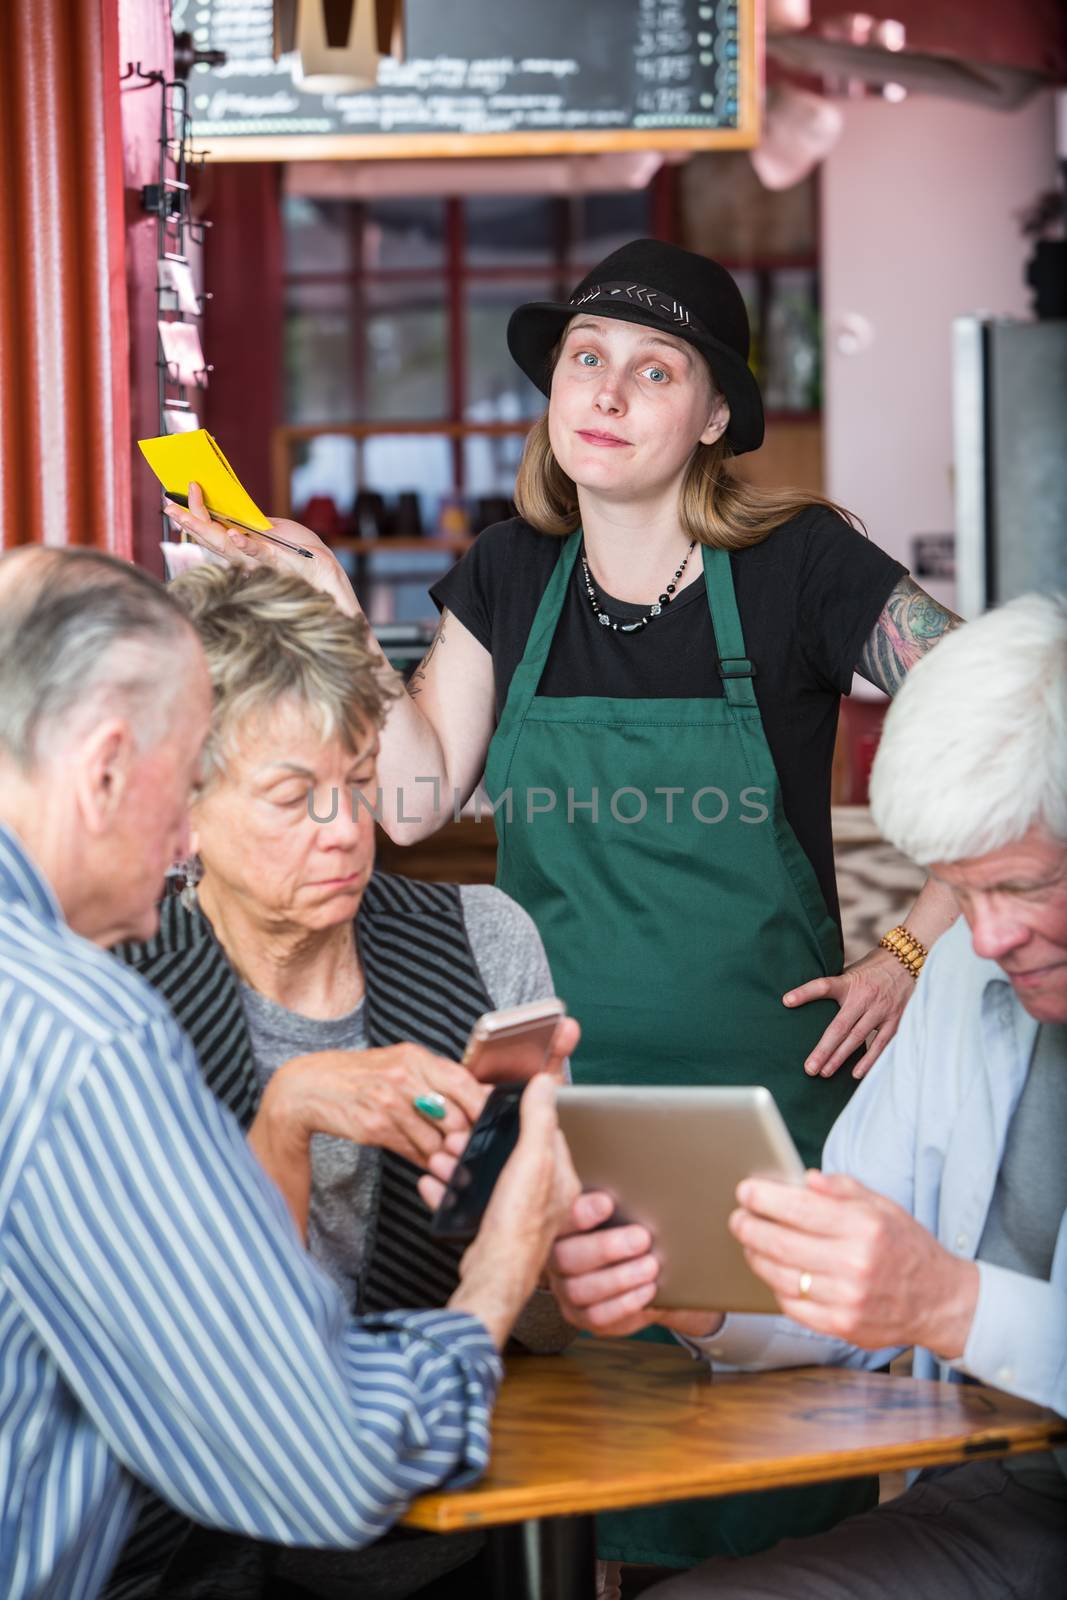 Friends in a coffee house distracted by their devices as server waits